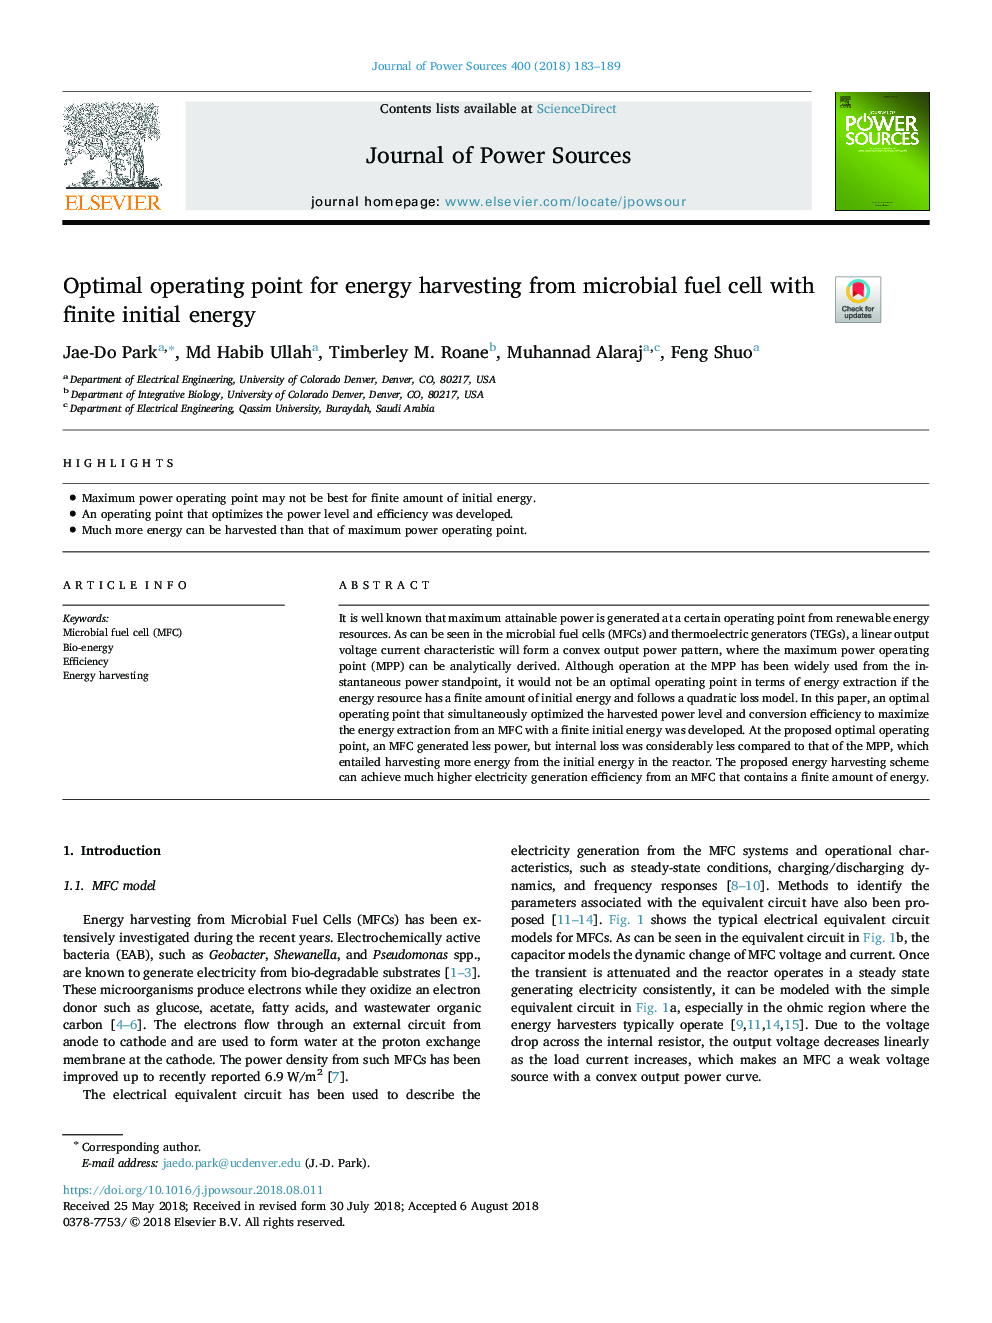 Optimal operating point for energy harvesting from microbial fuel cell with finite initial energy